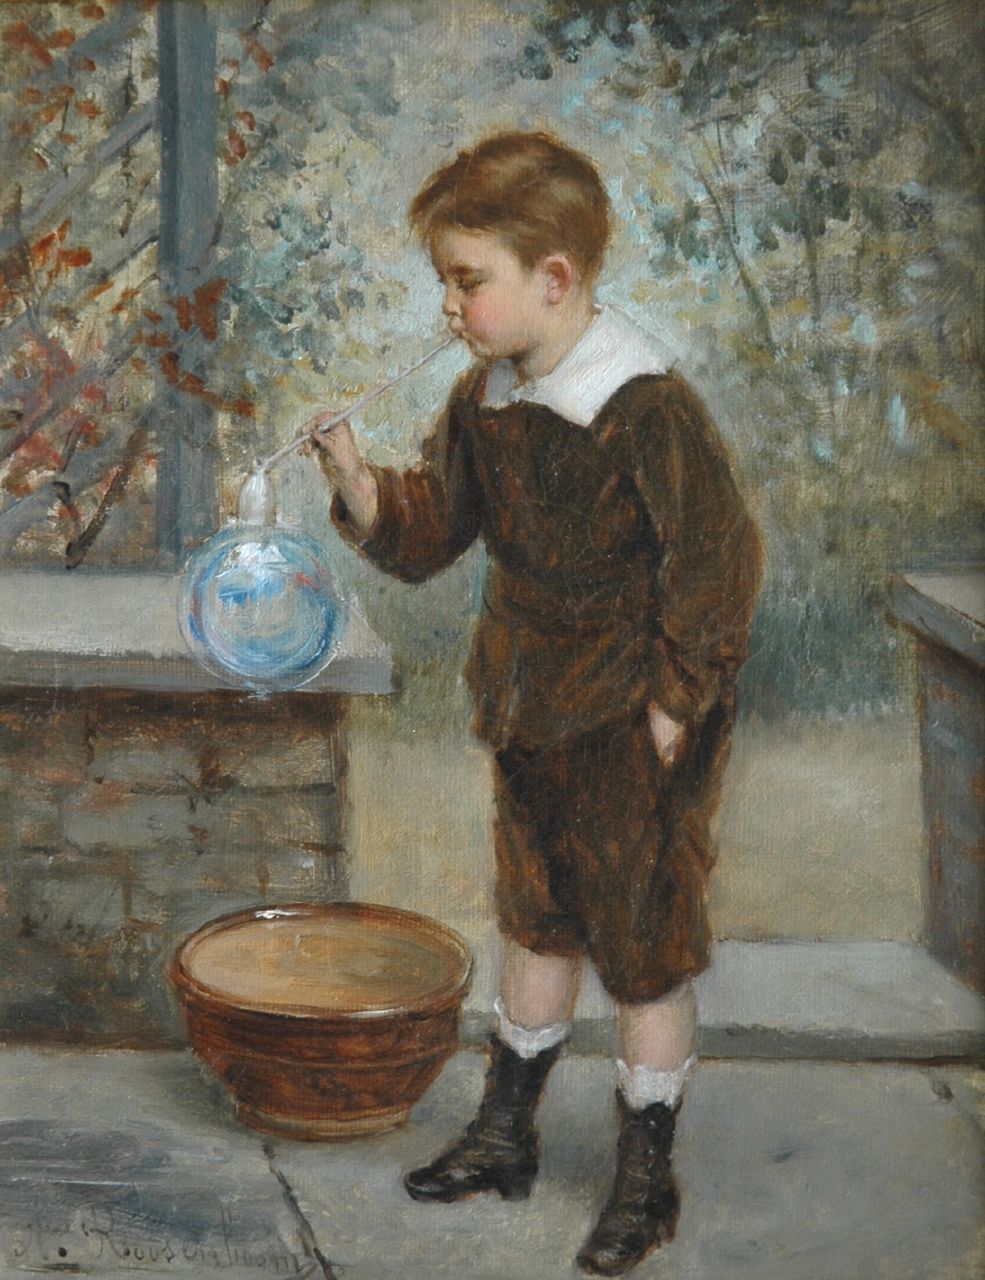 Roosenboom A.  | Albert Roosenboom, Blowing bubbles, oil on canvas 24.2 x 19.2 cm, signed l.l.